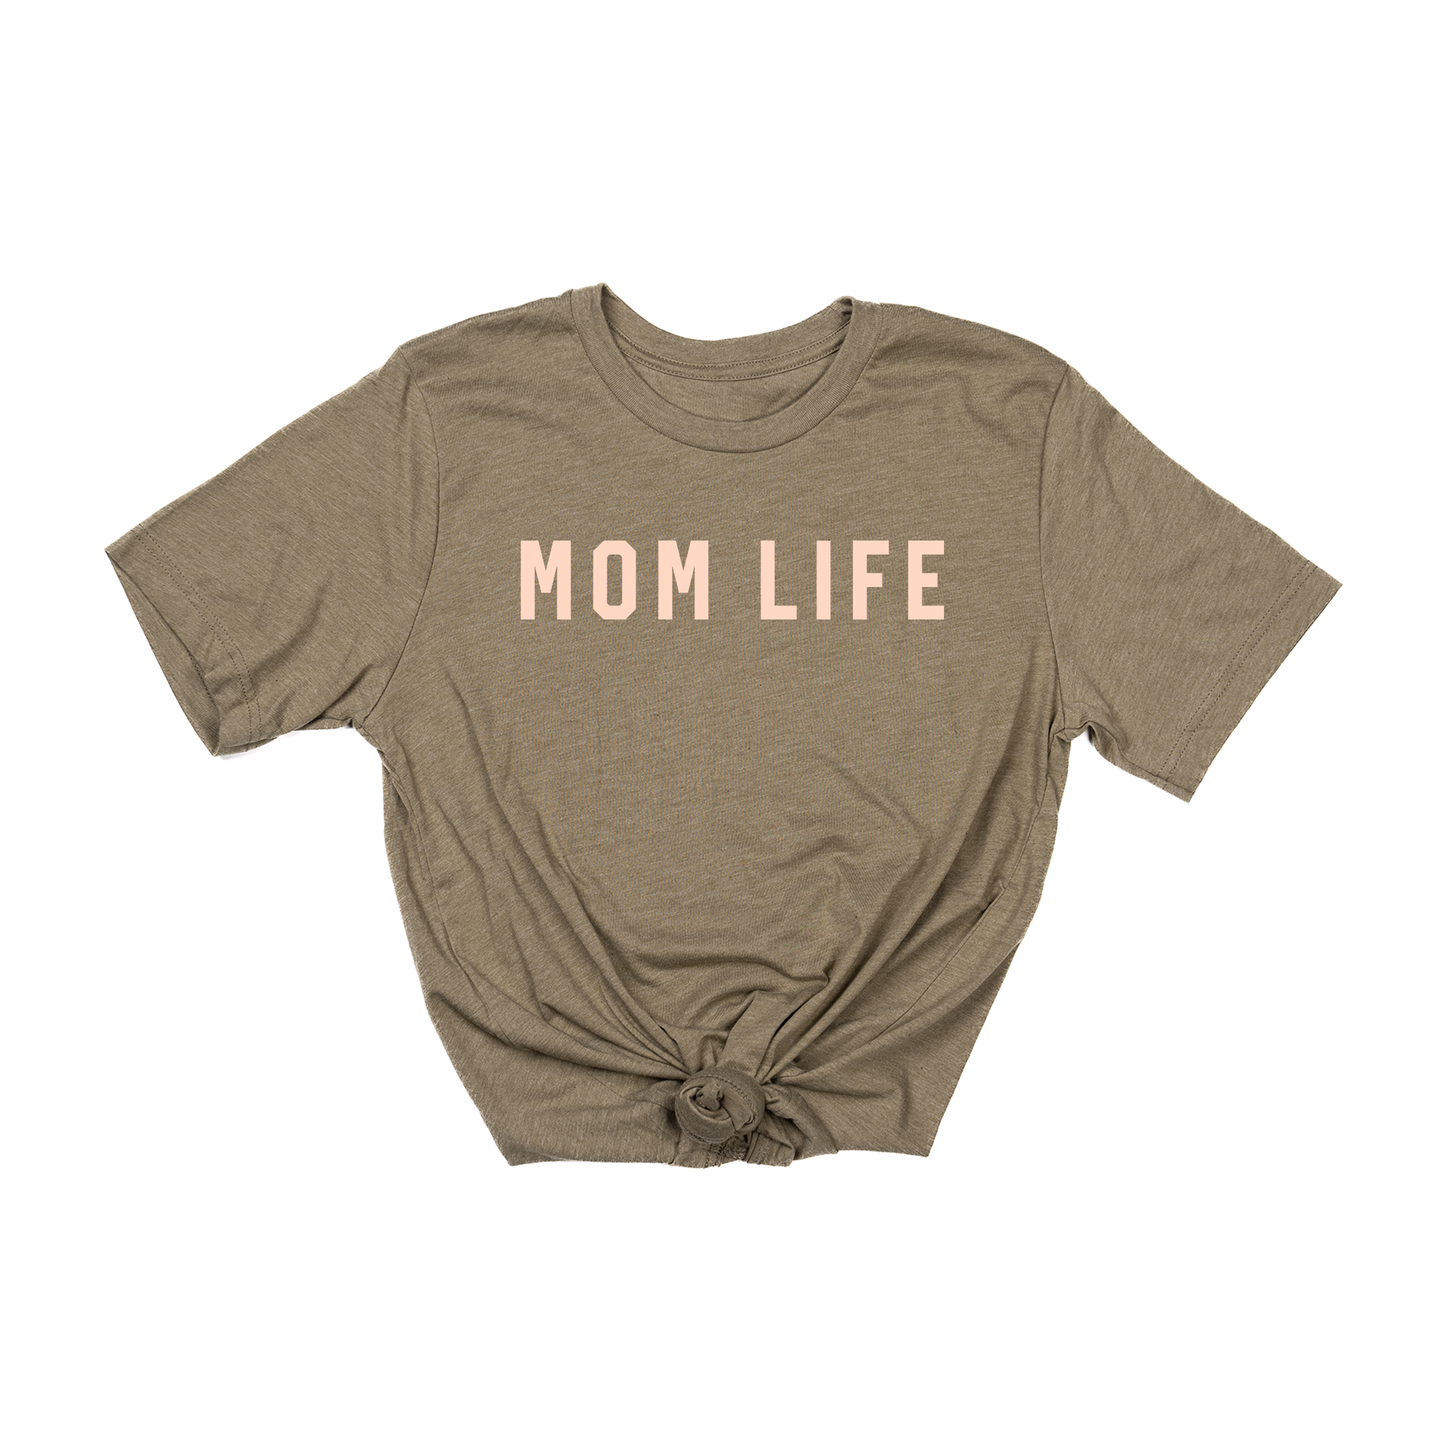 Mom Life (Across Front, Peach) - Tee (Olive)